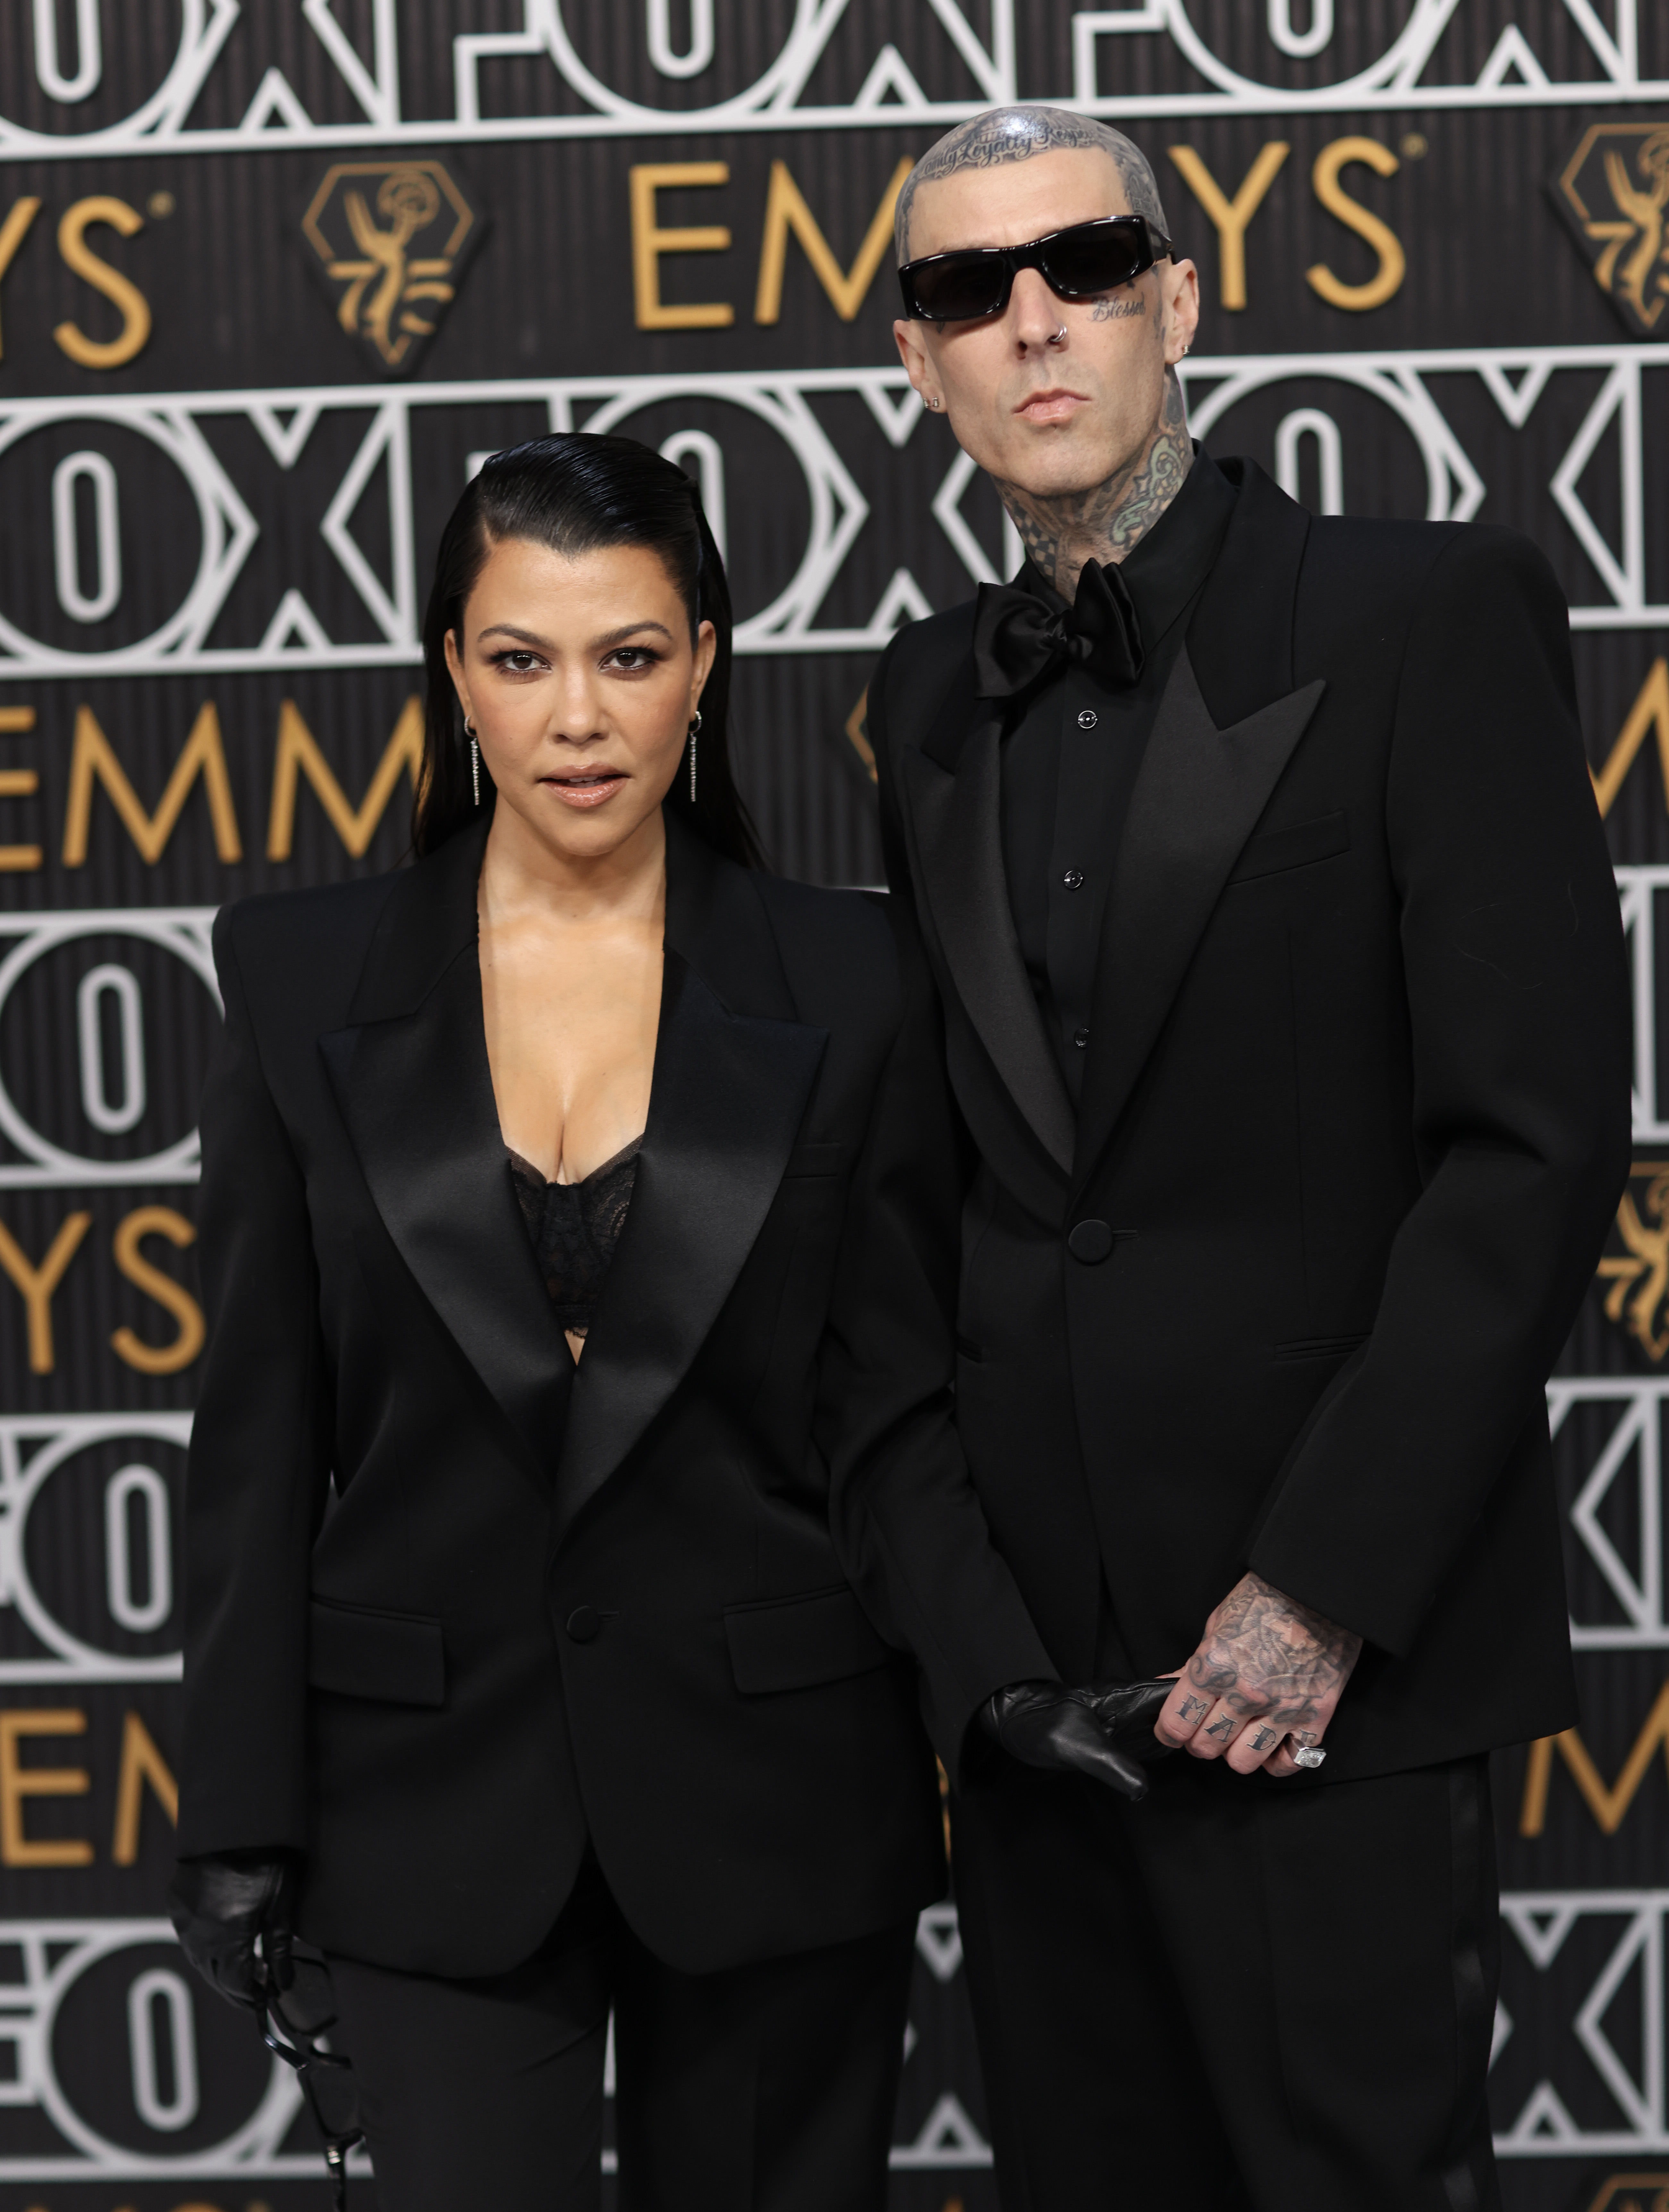 Kourtney and Travis, who welcomed baby Rocky in Novemeber, were bashed this week for 'neglecting' their other kids